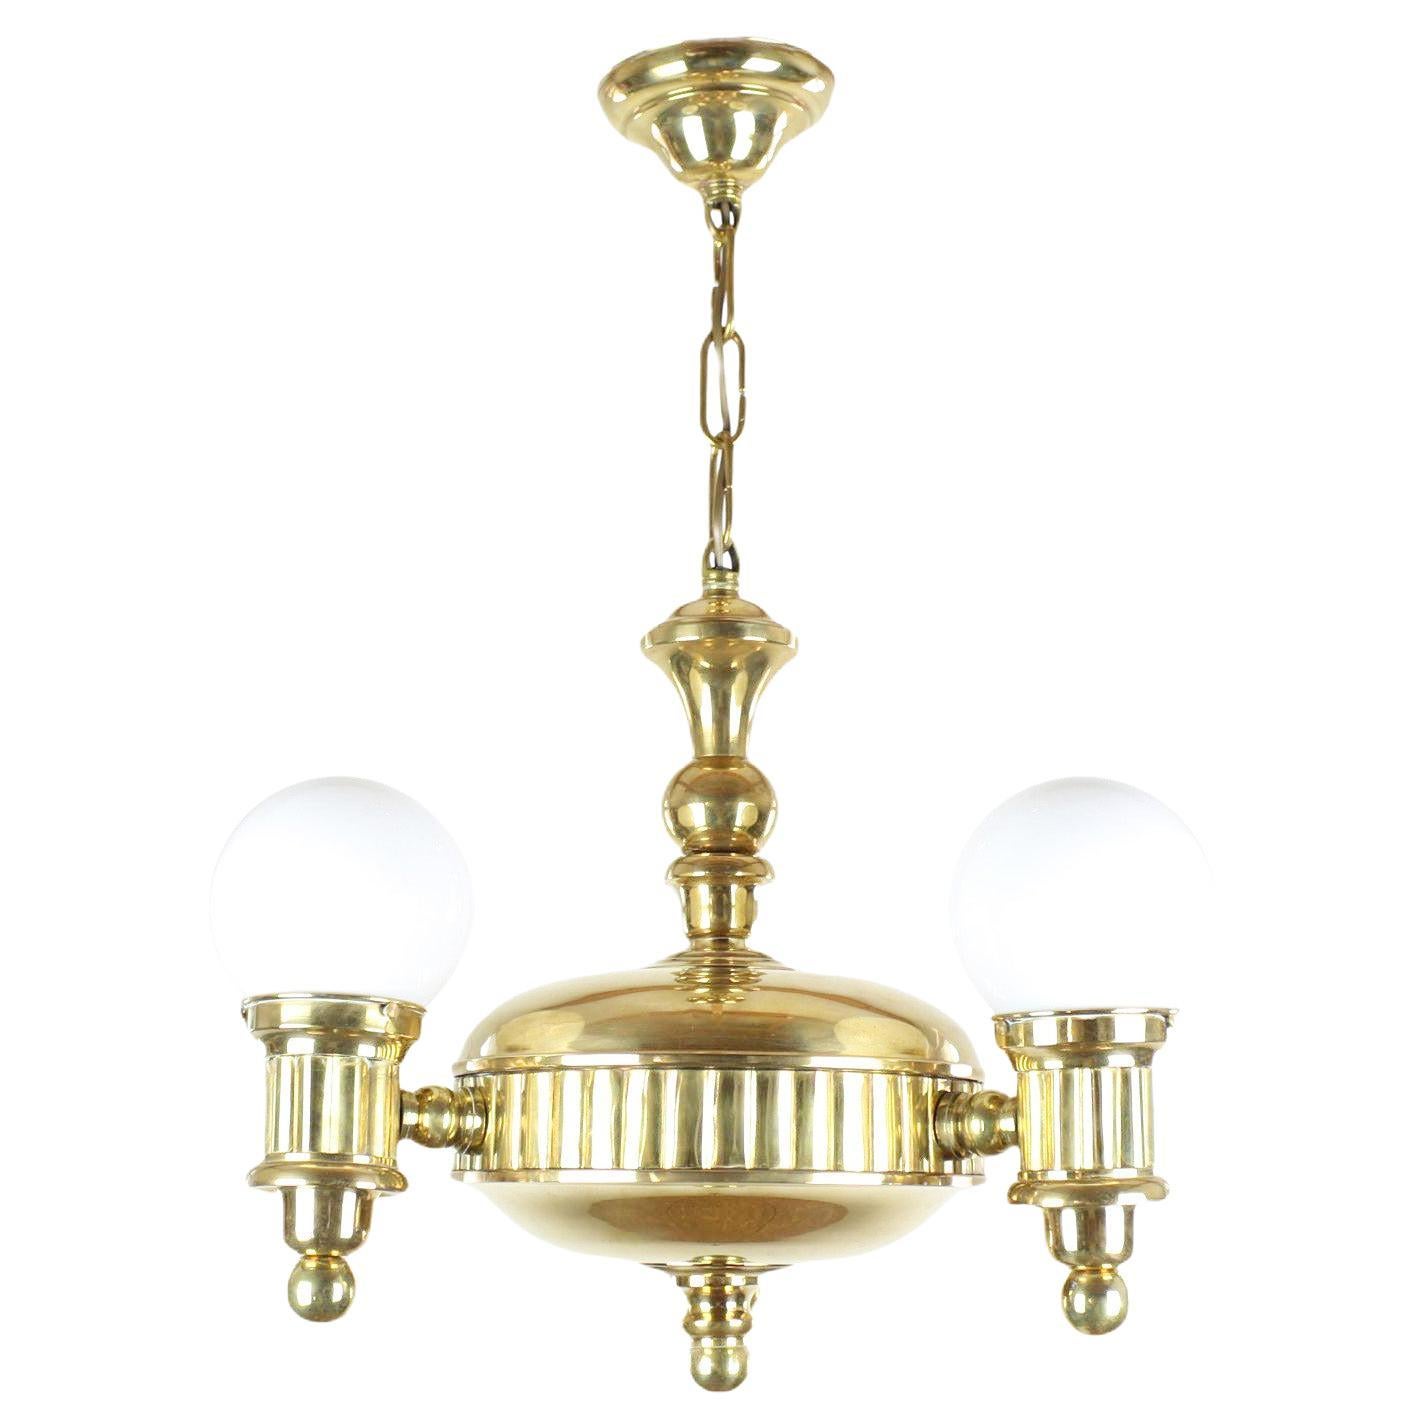 Exclusive Art Deco Chandelier with Swivel Arms 'Three-Arm Design' For Sale